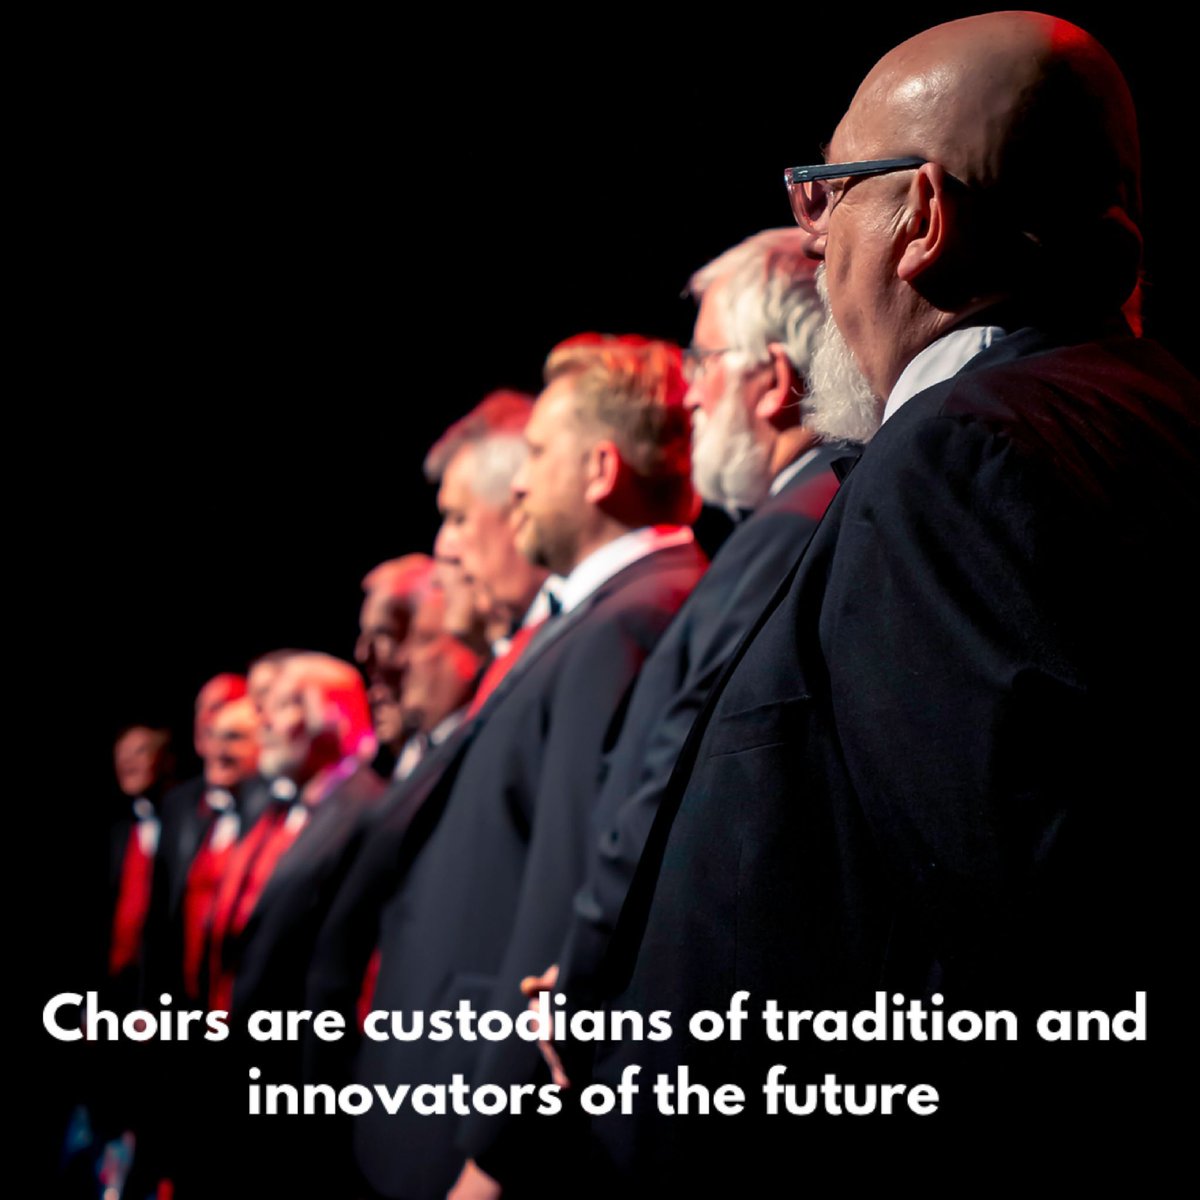 #WednesdayWisdom As musicians, we are custodians of tradition and innovators of the future. Honour the legacy of the past while embracing the endless possibilities of tomorrow. 
#FronMVC #MenSinging #MusicalLegacy